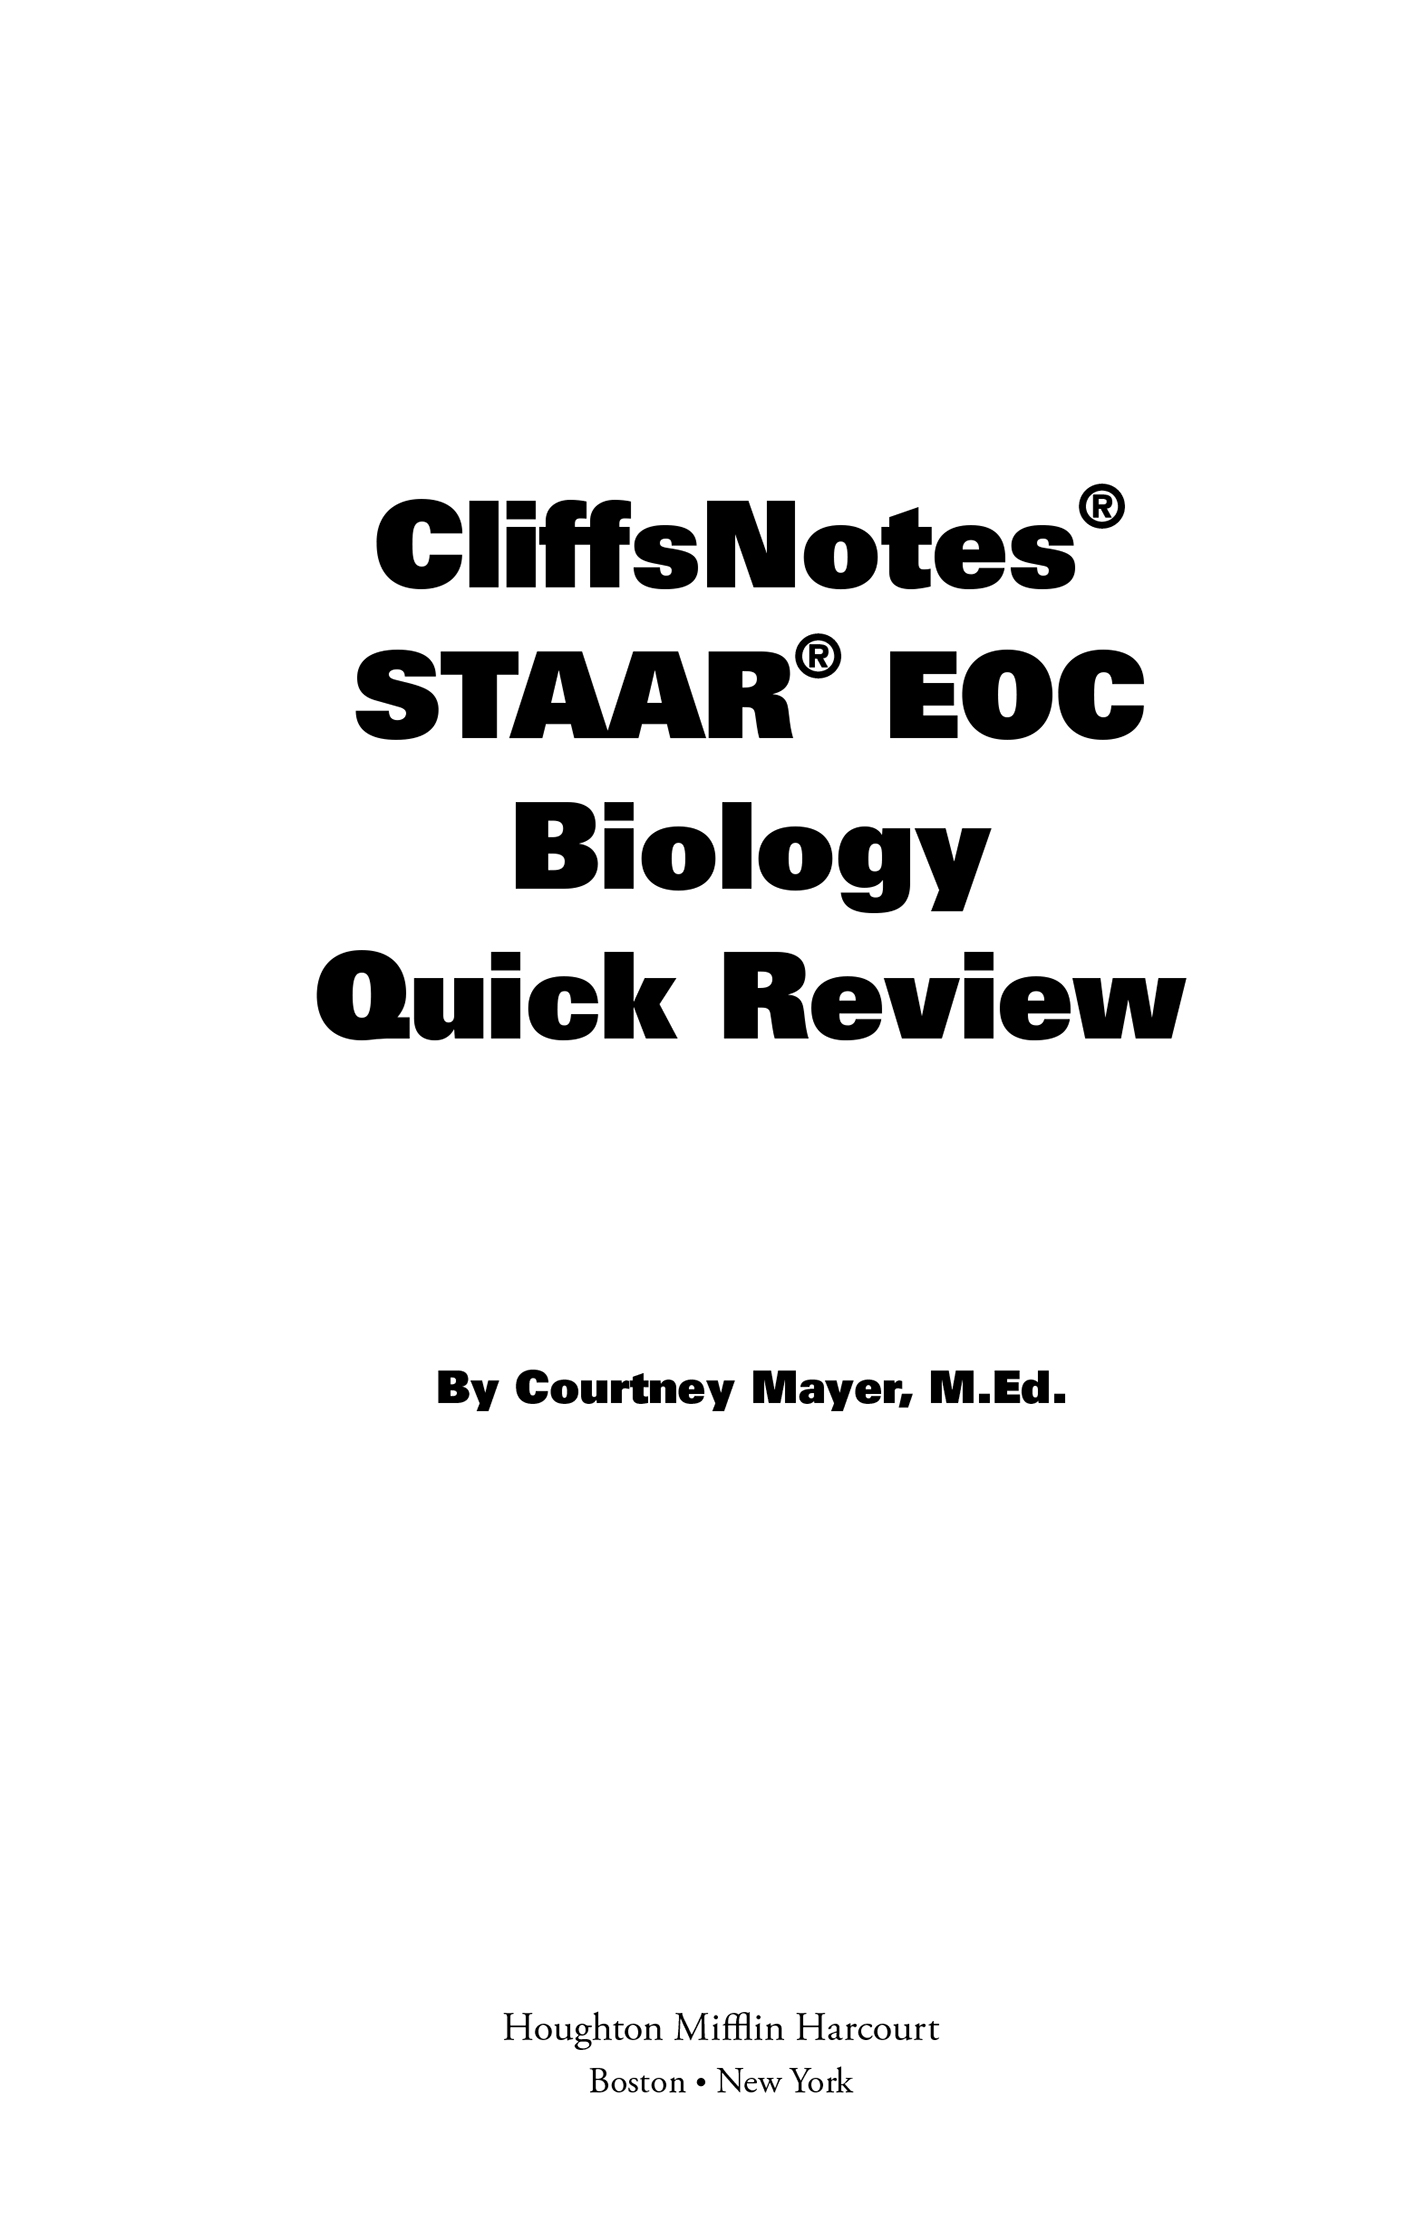 INTRODUCTION C liffsNotes STAAR EOC Biology Quick Review is a reference tool - photo 1